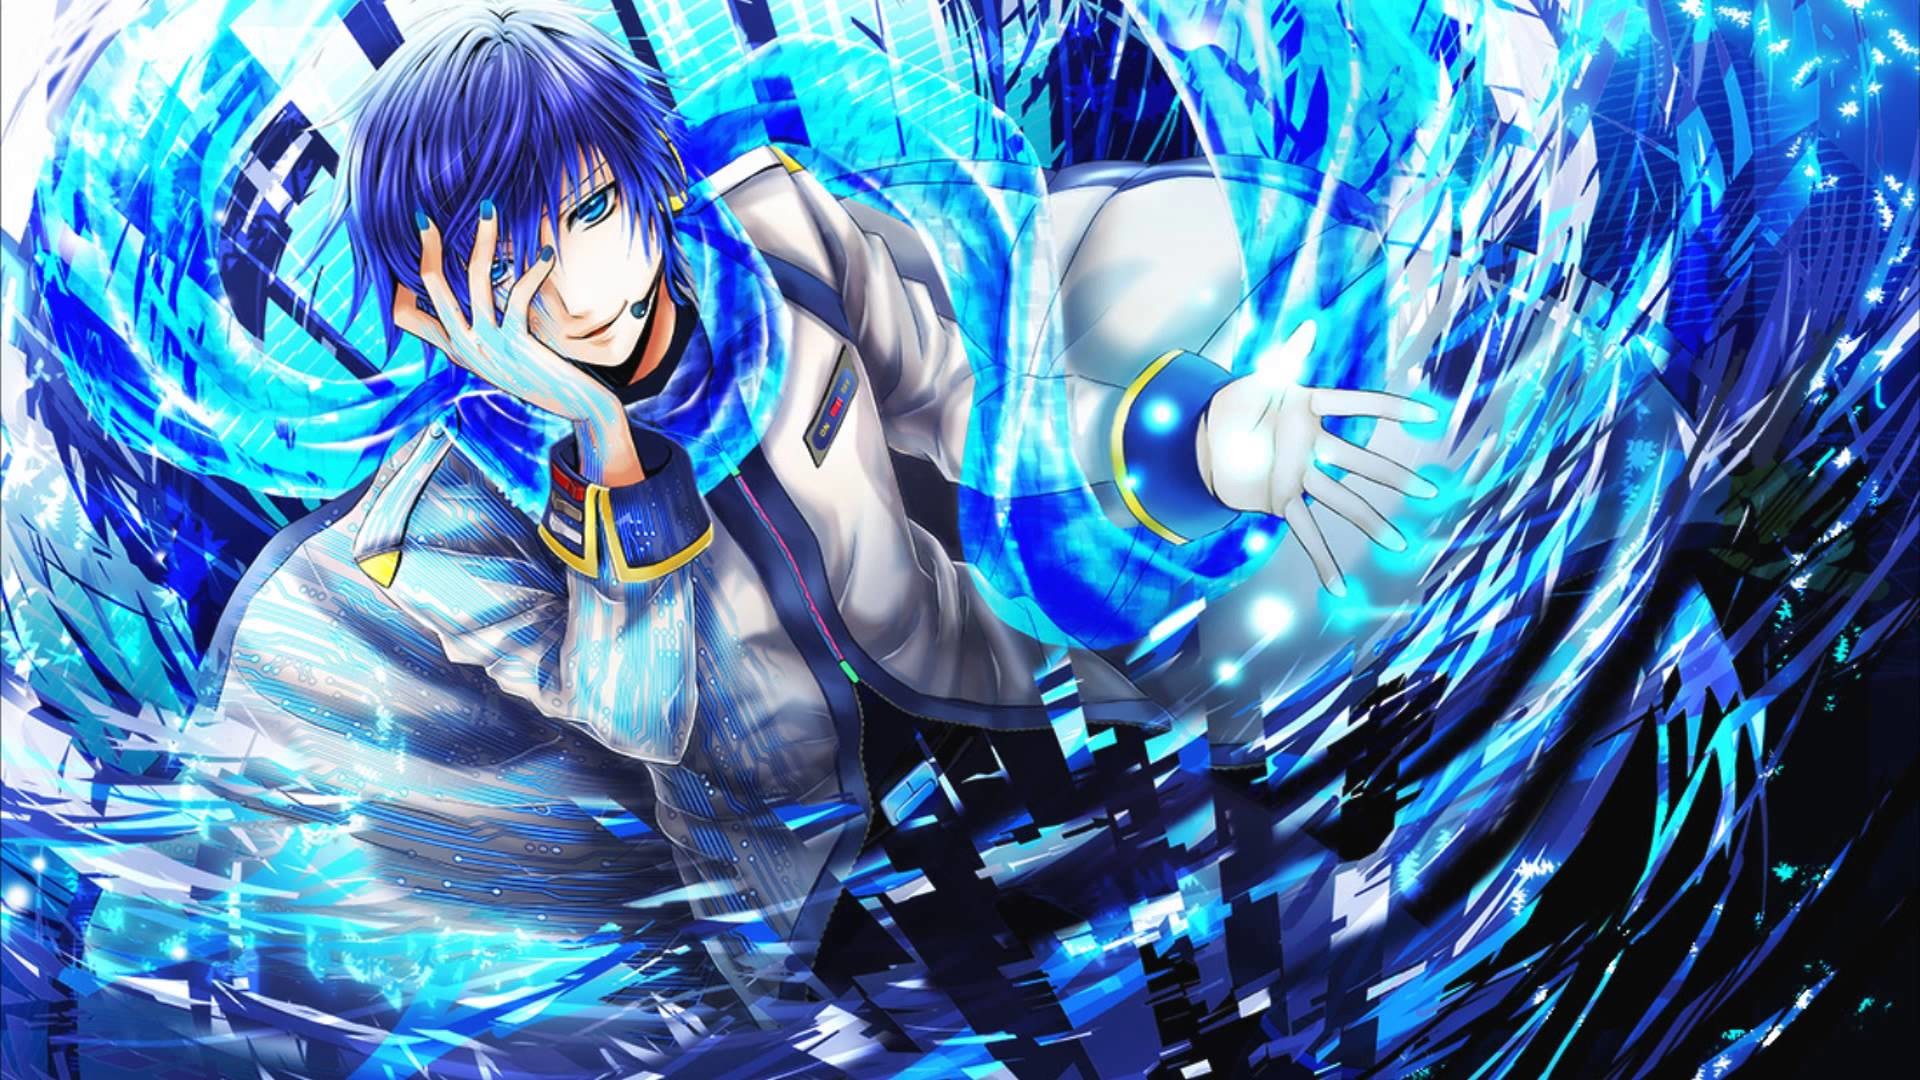 1920x1080 Kaito Vocaloid Backgrounds.